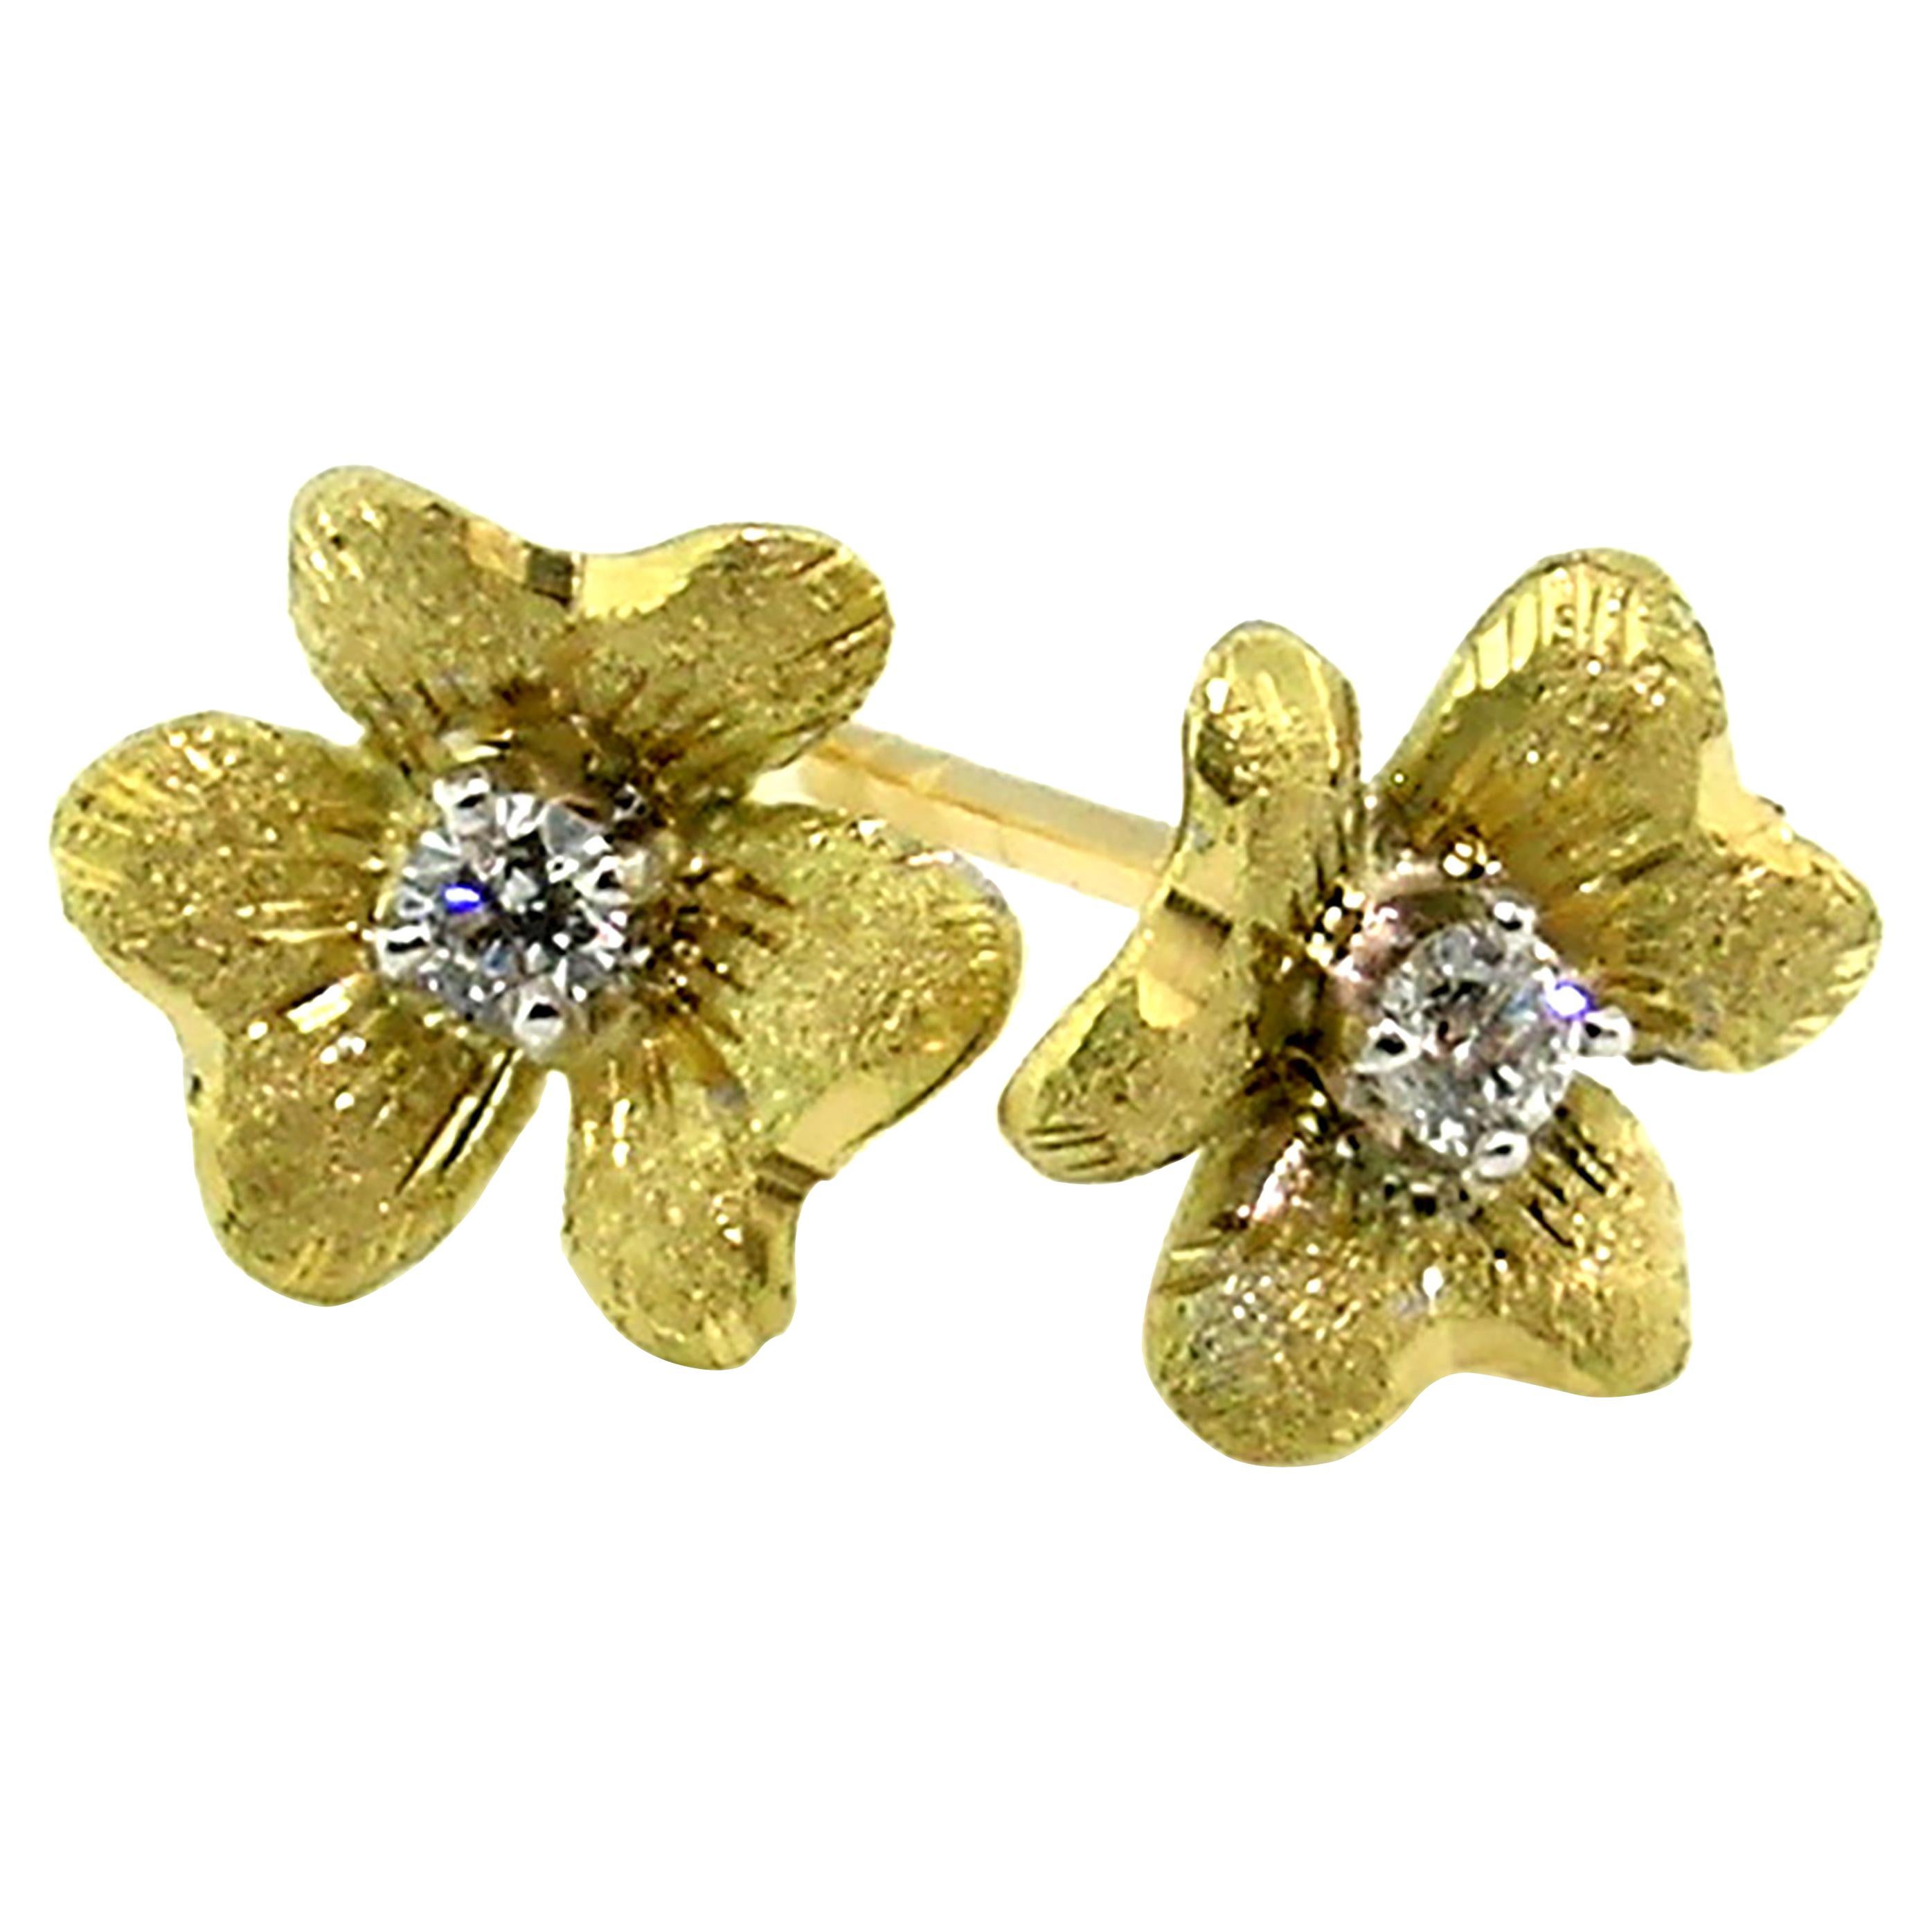 Floral 18kt Yellow Gold and Diamond Earrings, Made in Florence, Italy